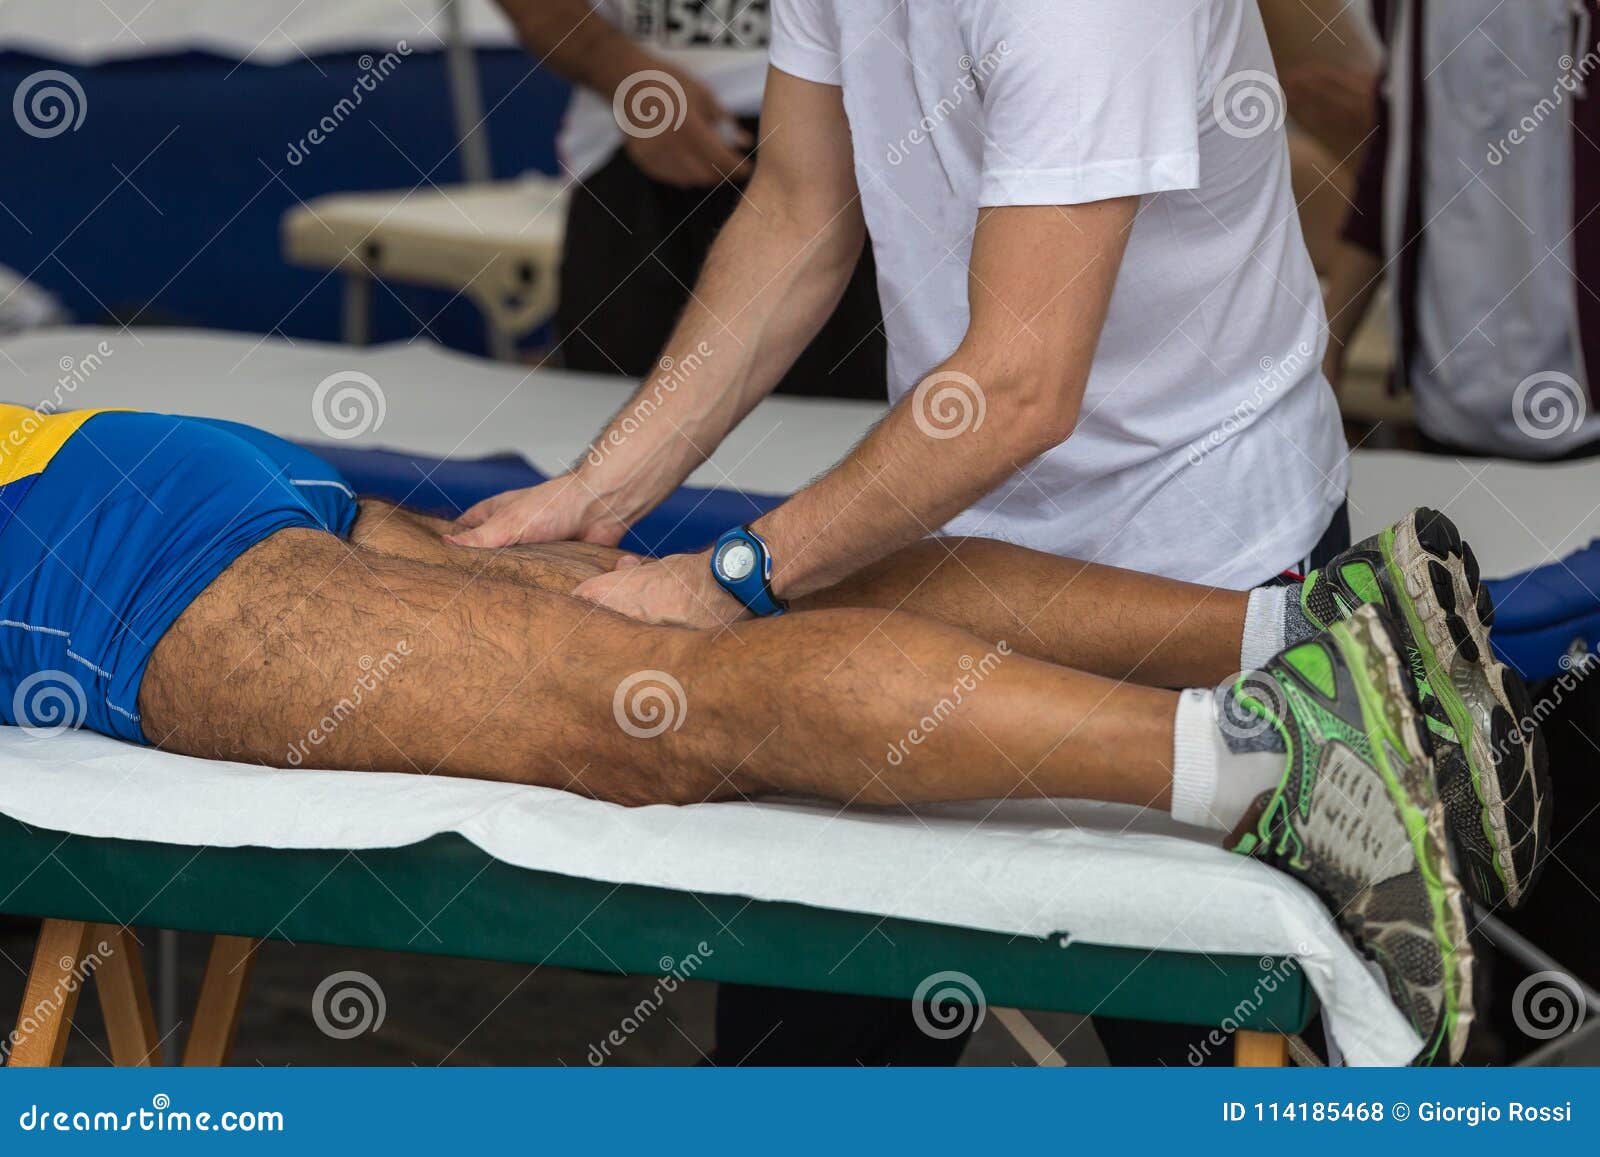 Athlete`s Muscles Massage after Sport Workout Stock Photo - Image of professional, athletic ...